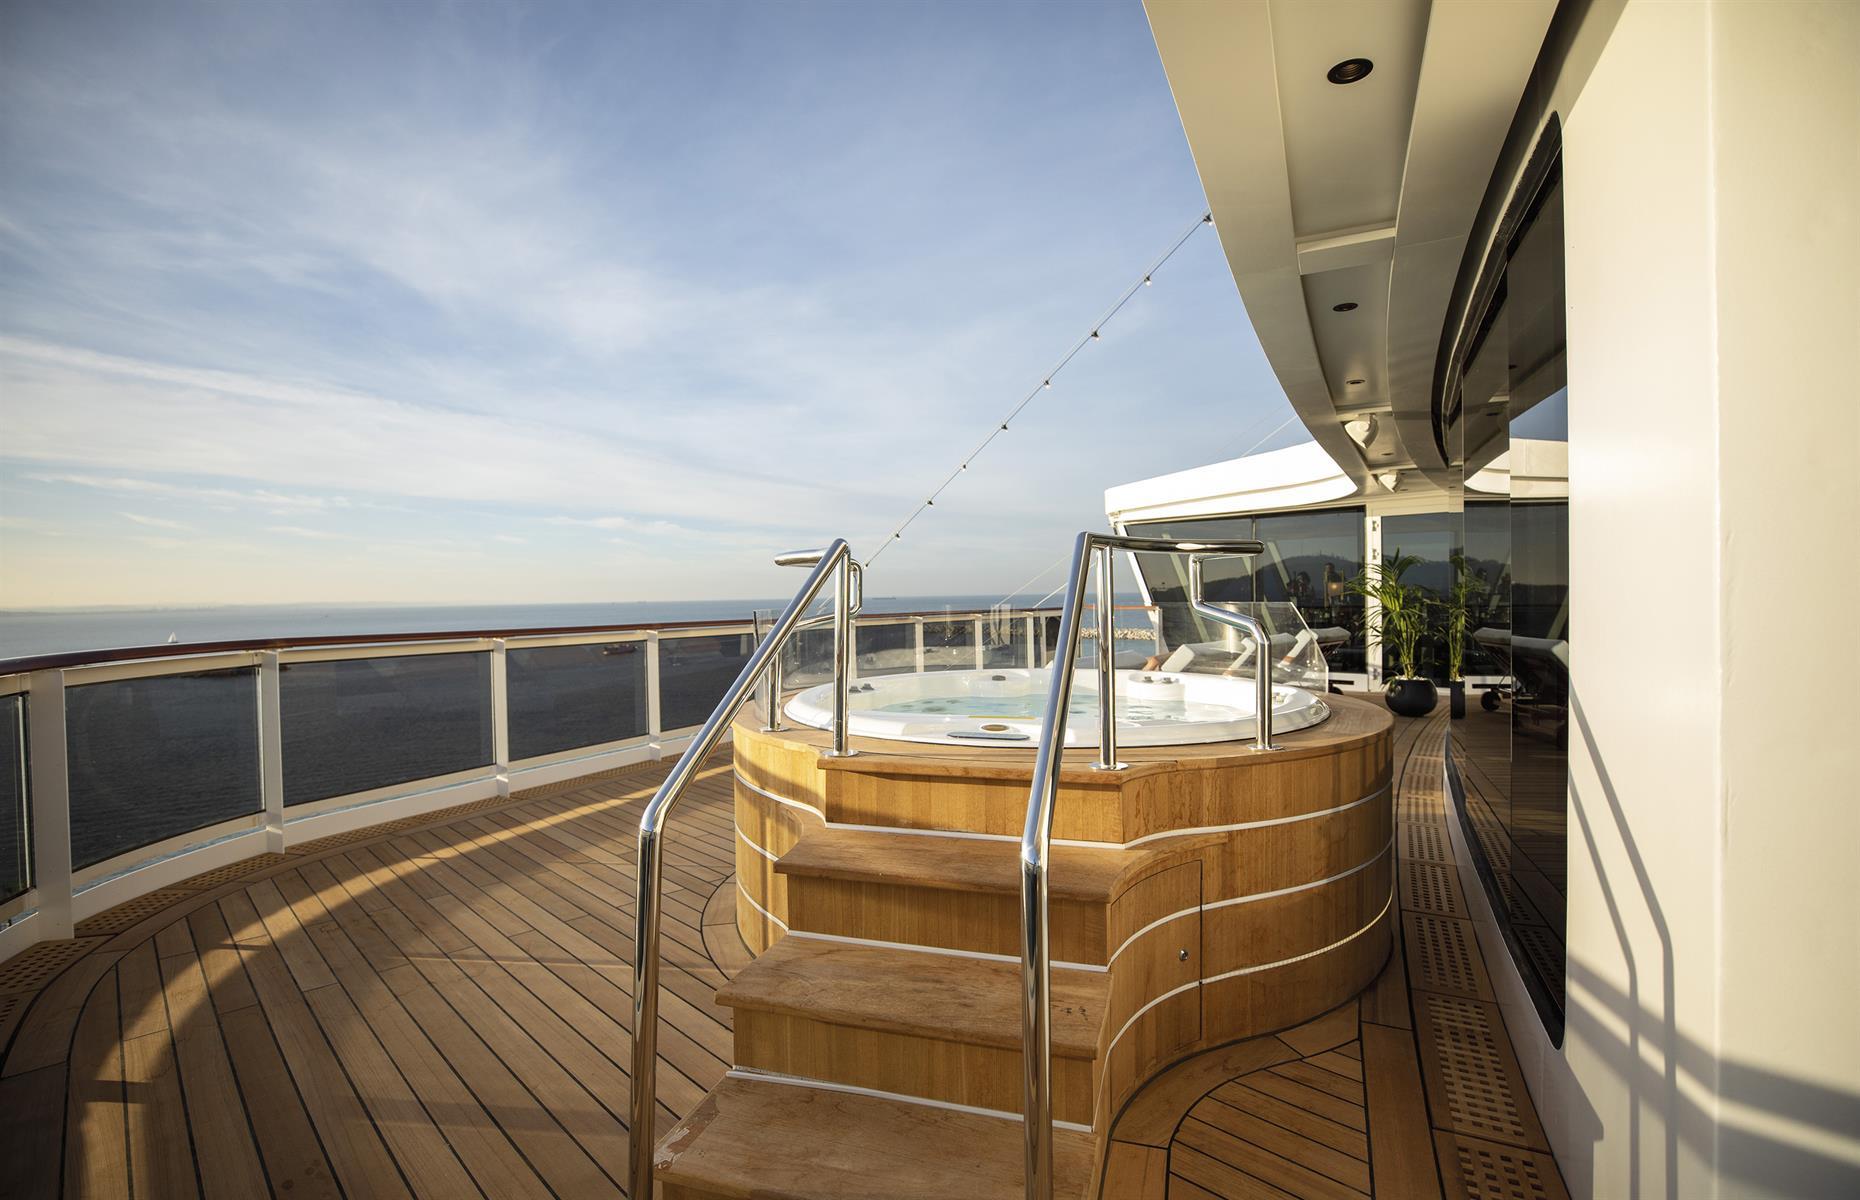 <p>Each of the beautifully appointed suites has a private balcony, while the palatial Regent Suite – perched on the 14th deck – has a wraparound veranda over the ship’s bow. Its custom-made Treesse mini-pool spa is situated on the front balcony, while the king-sized Vividus bed was handcrafted by upscale Swedish brand, Hästens.</p>